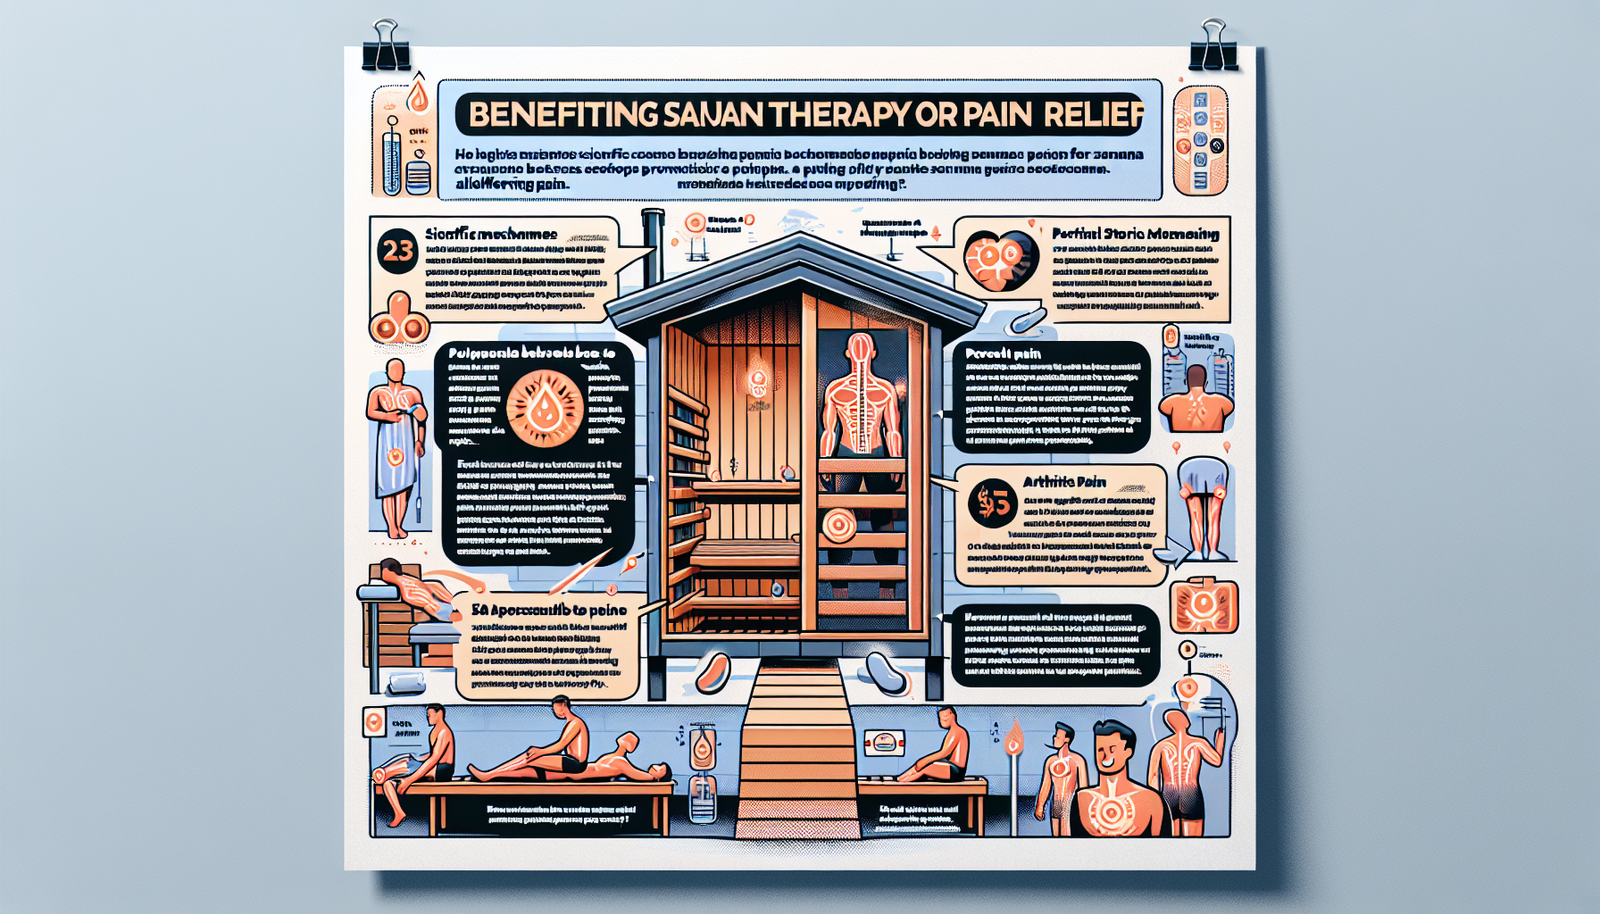 Can Saunas Help With Pain Relief?